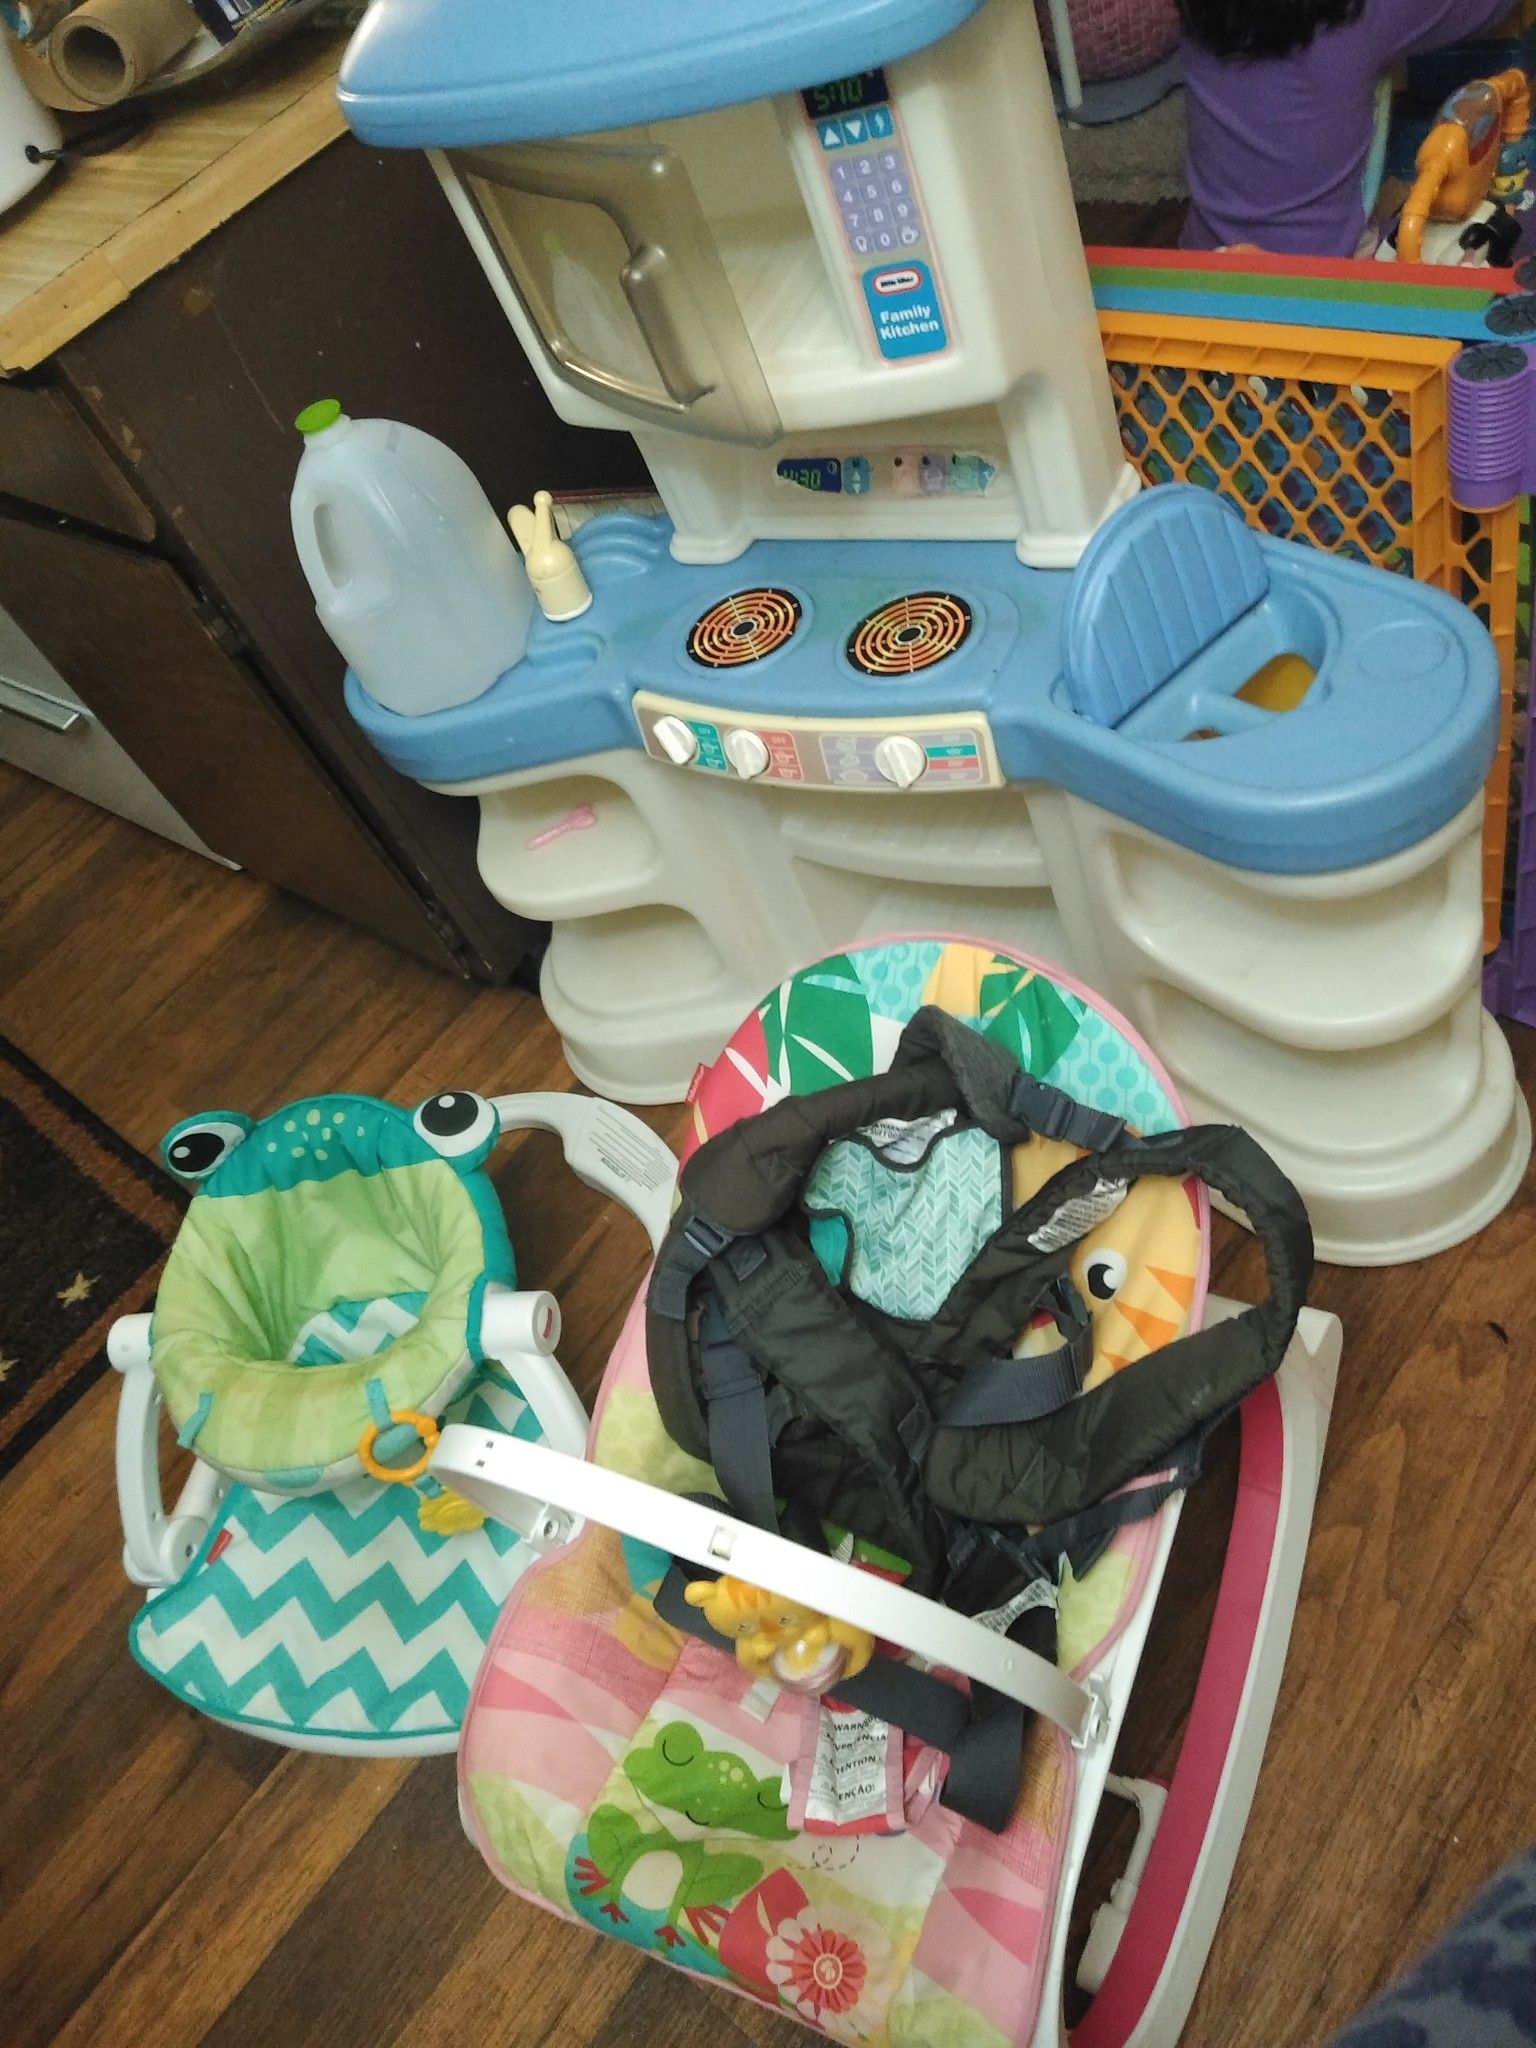 Baby holder and two chairs